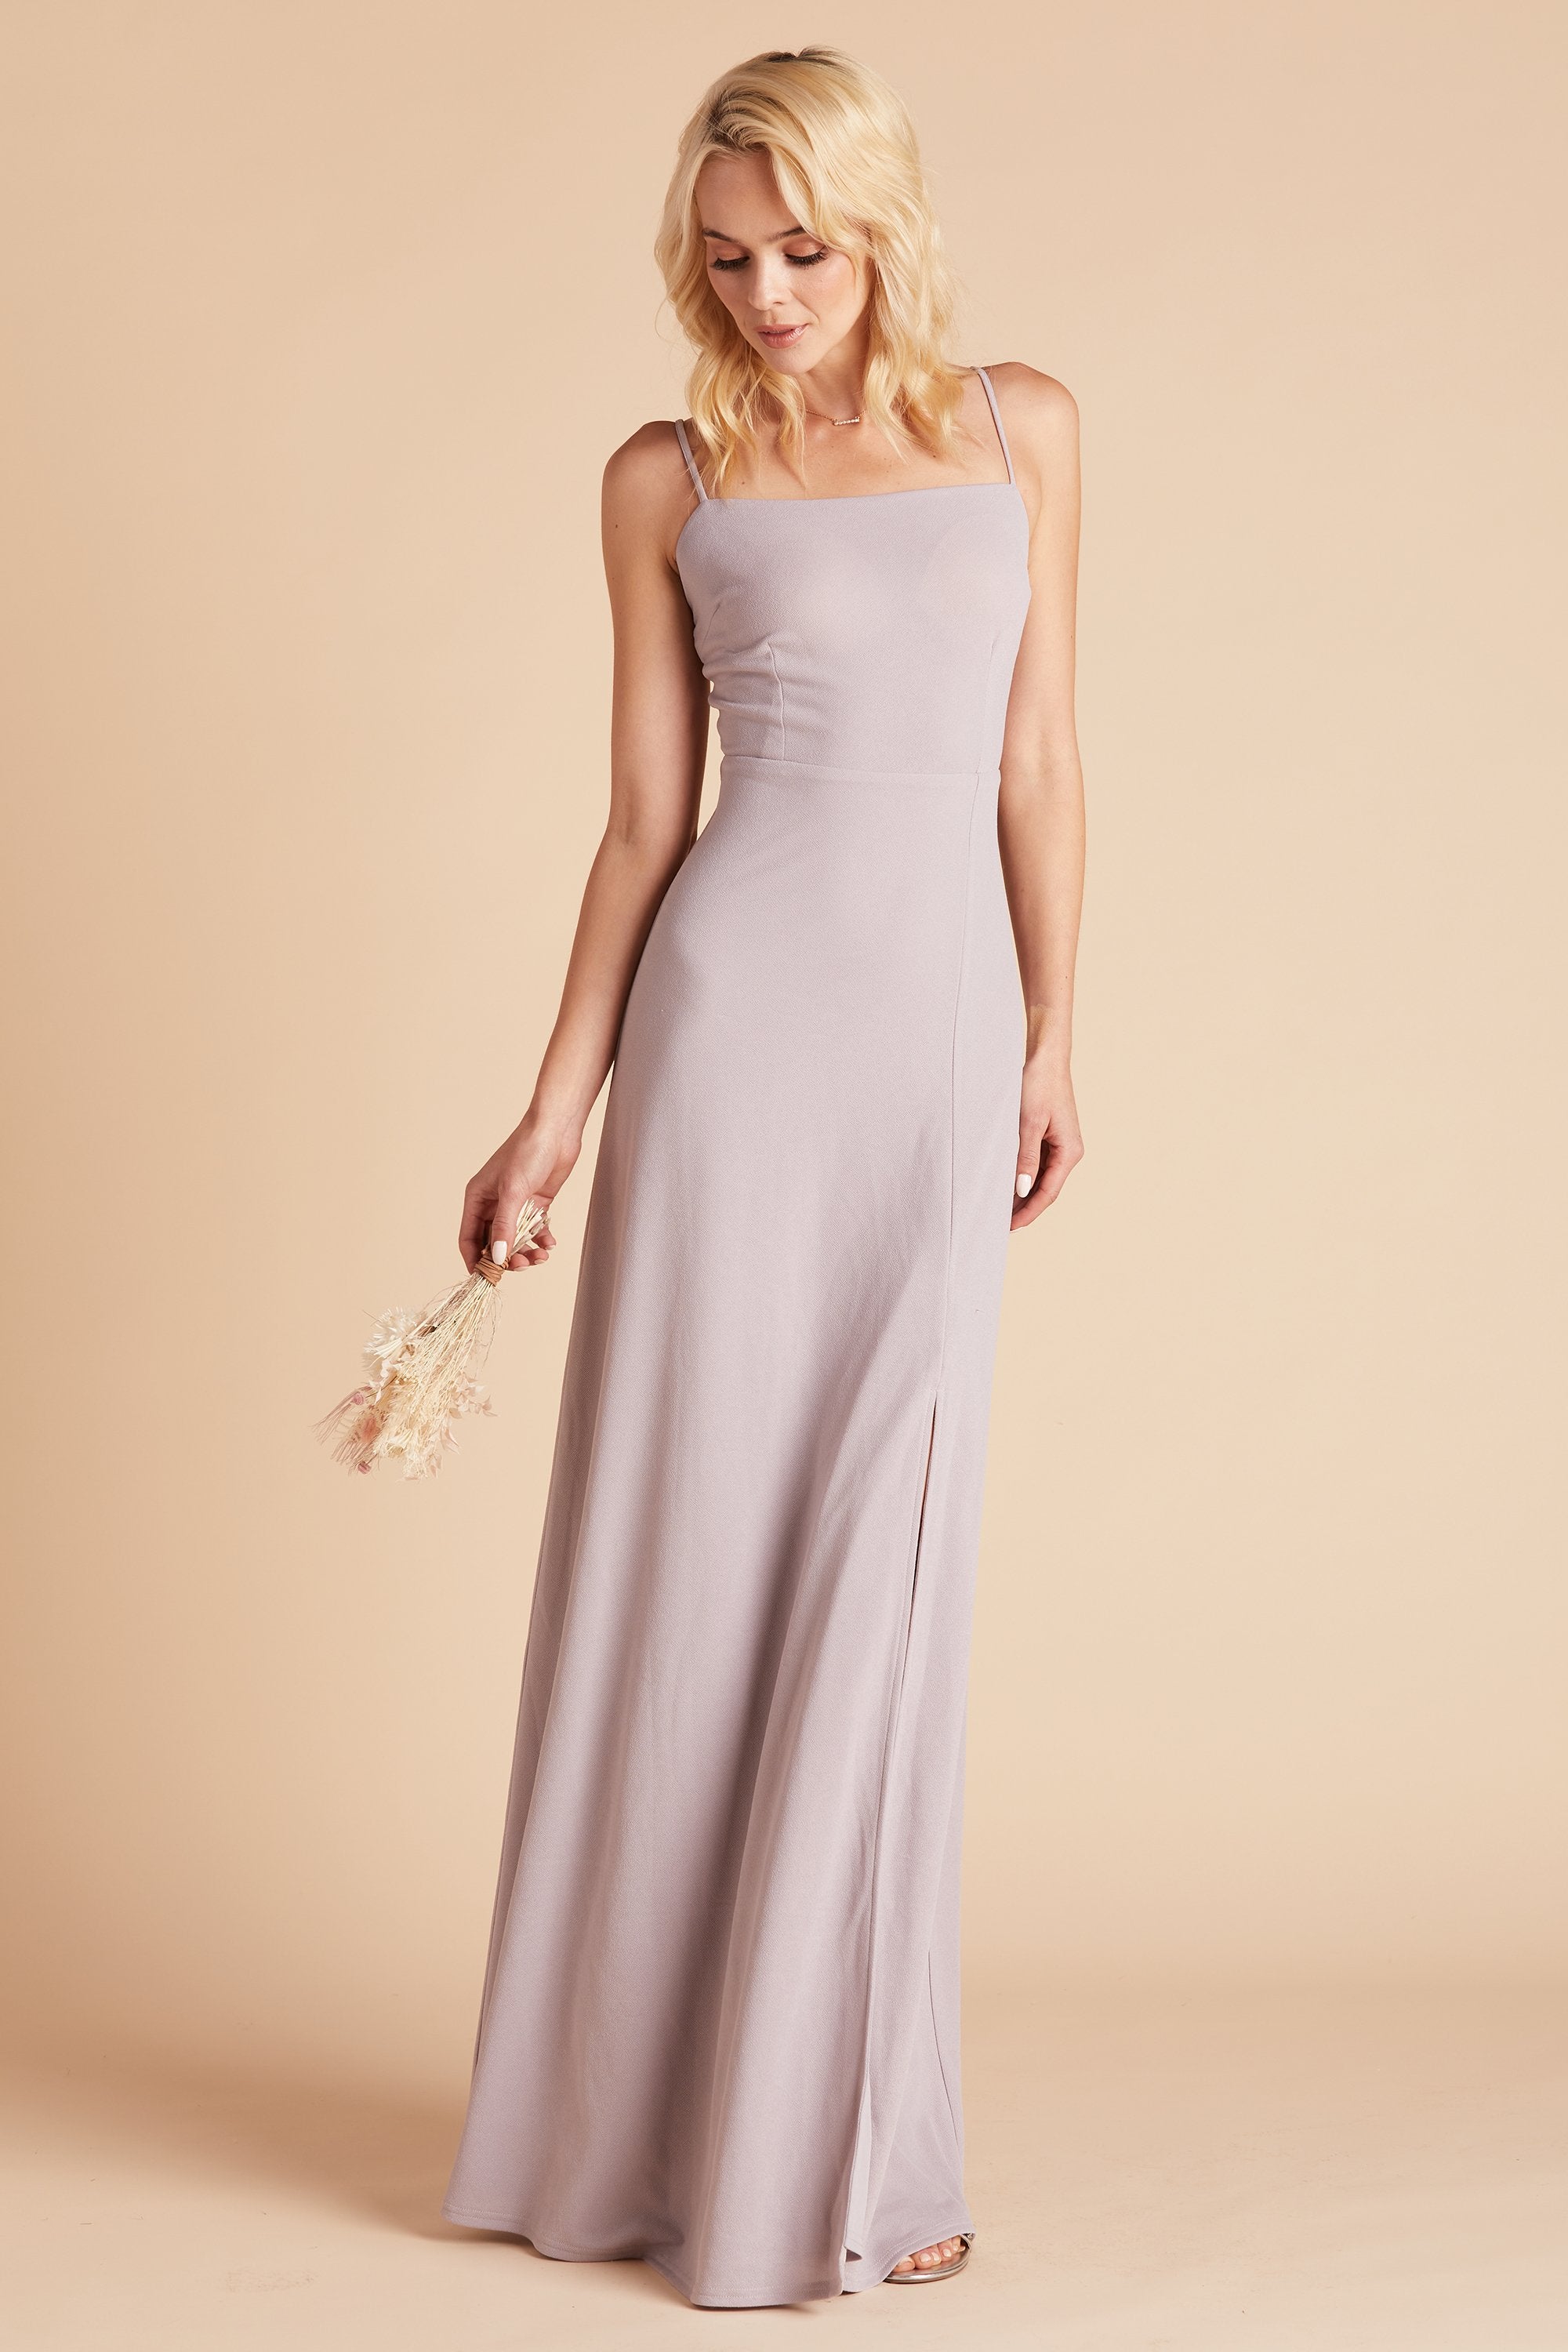 Benny bridesmaid dress in emerald green crepe by Birdy Grey, front view